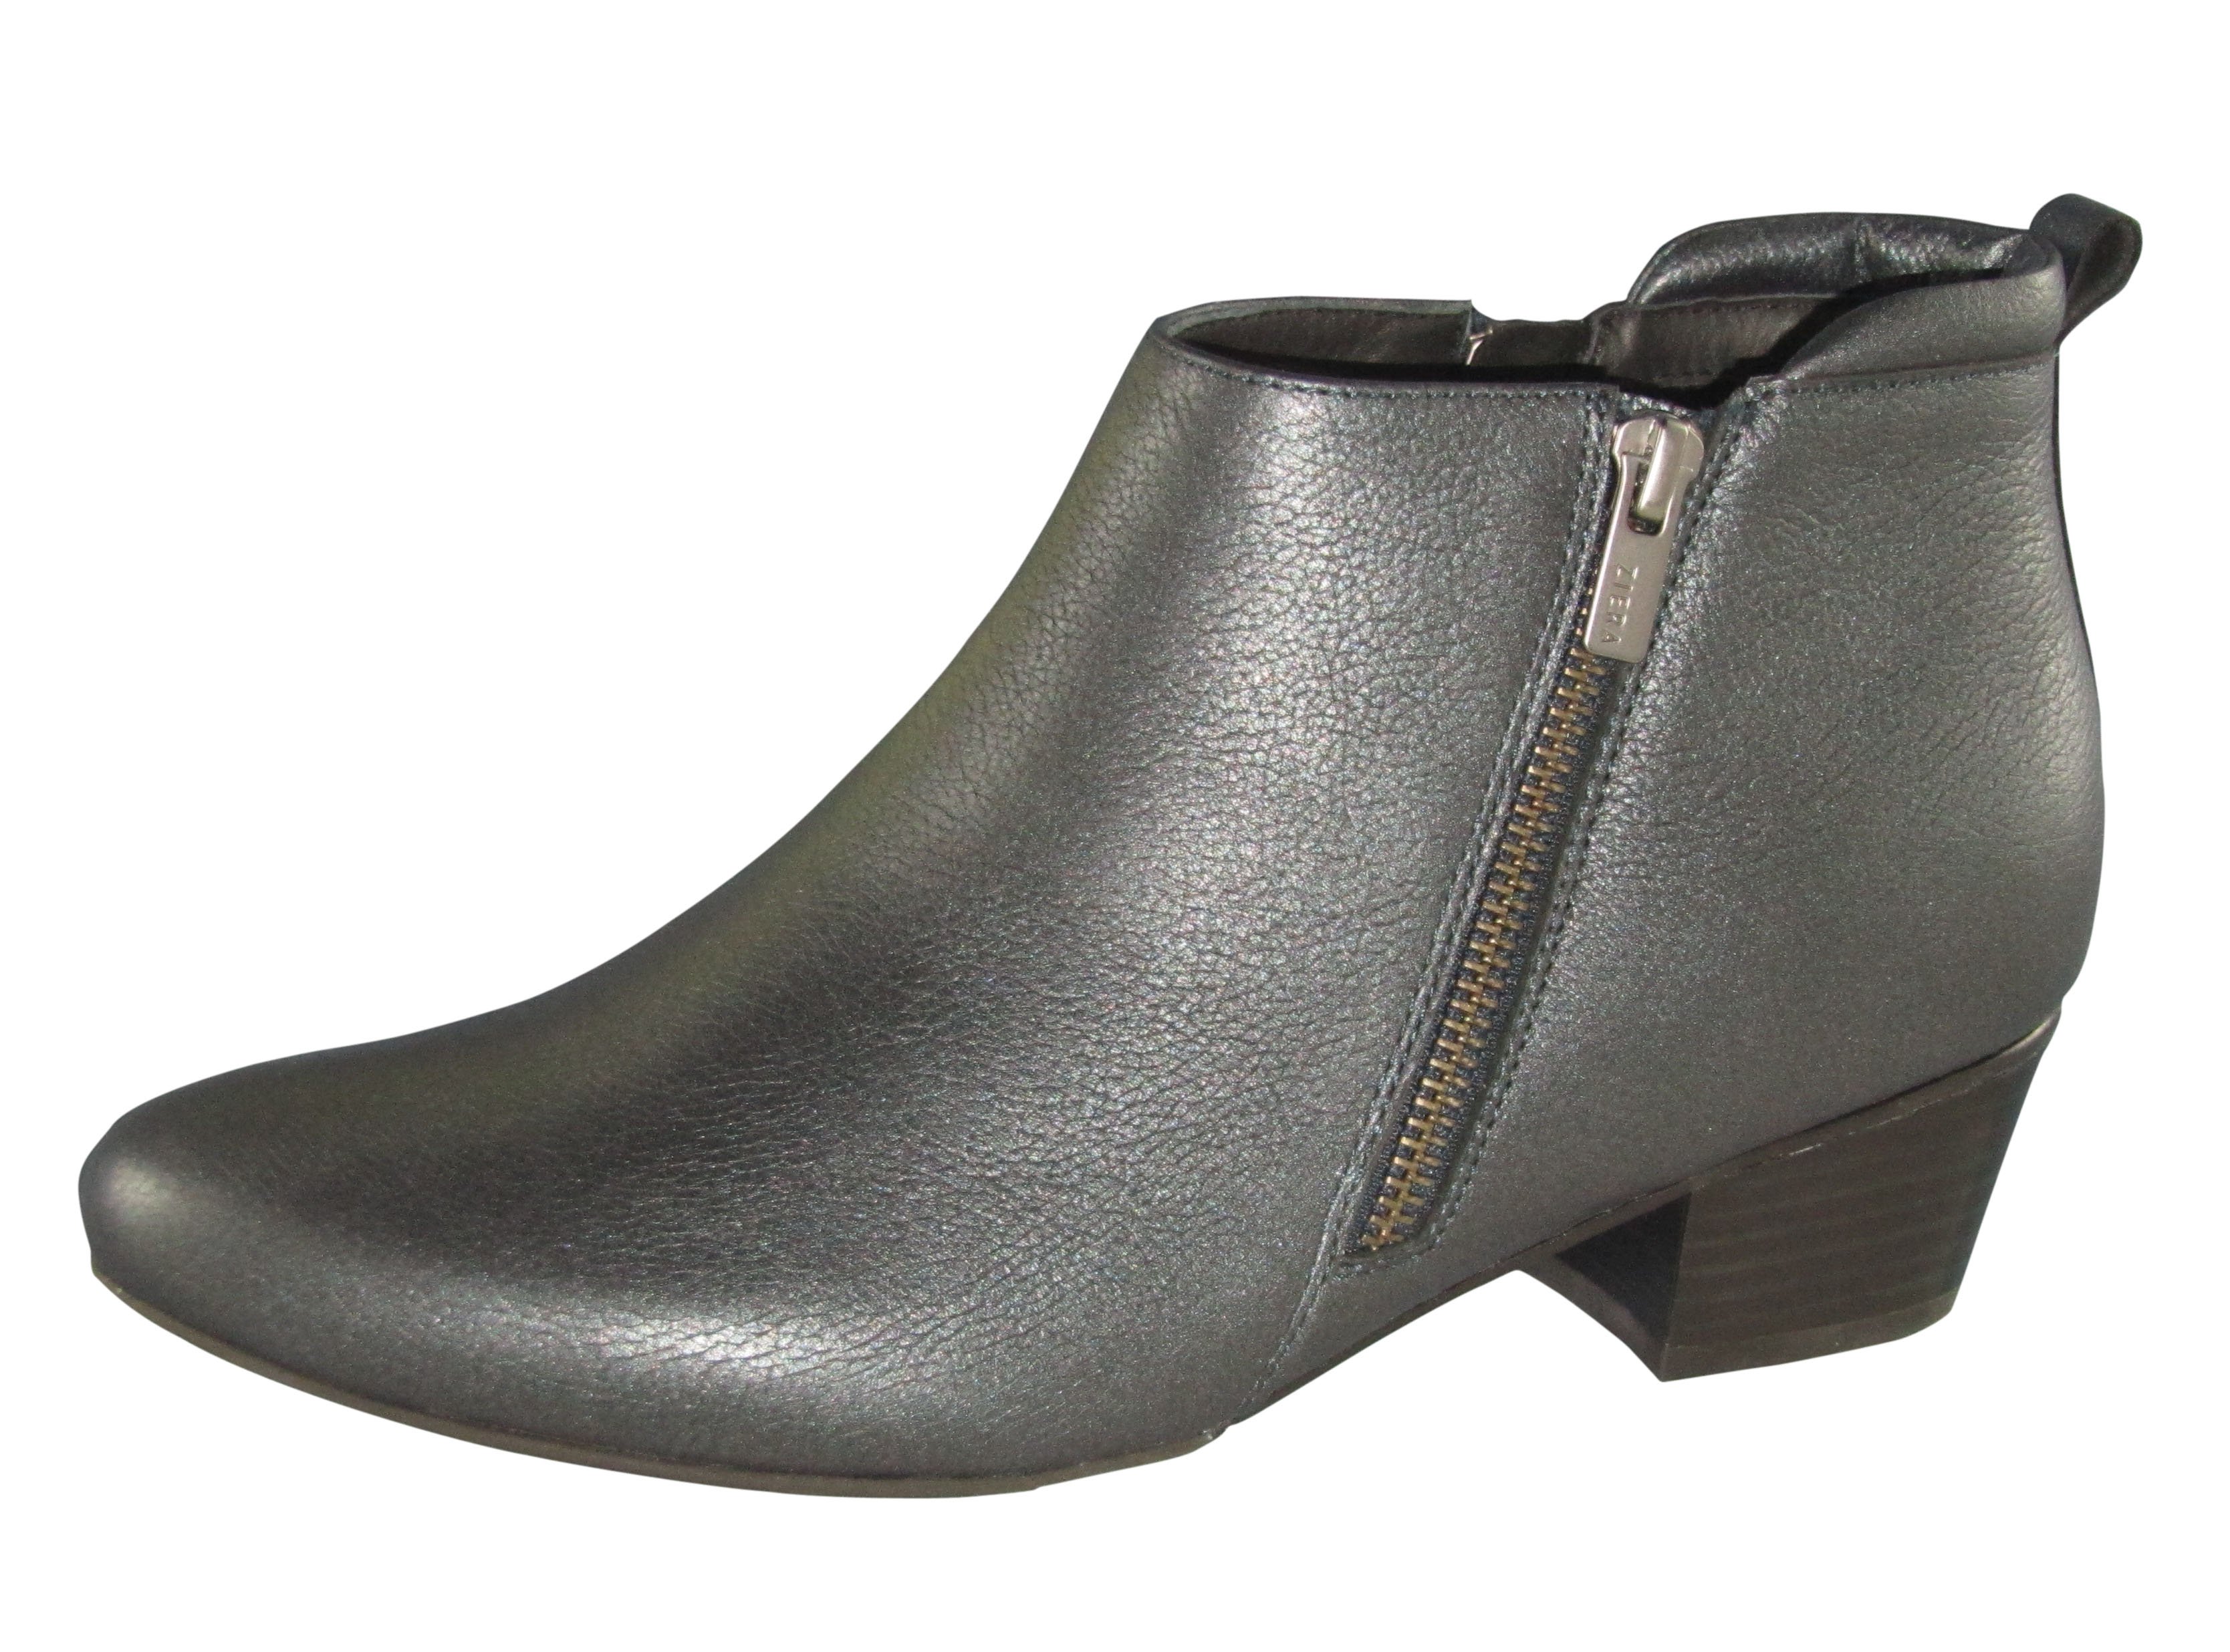 VERTICE ZIERA - WOMENS SHOES-COMFORT : Shirley's Shoes - AW19 ZIERA